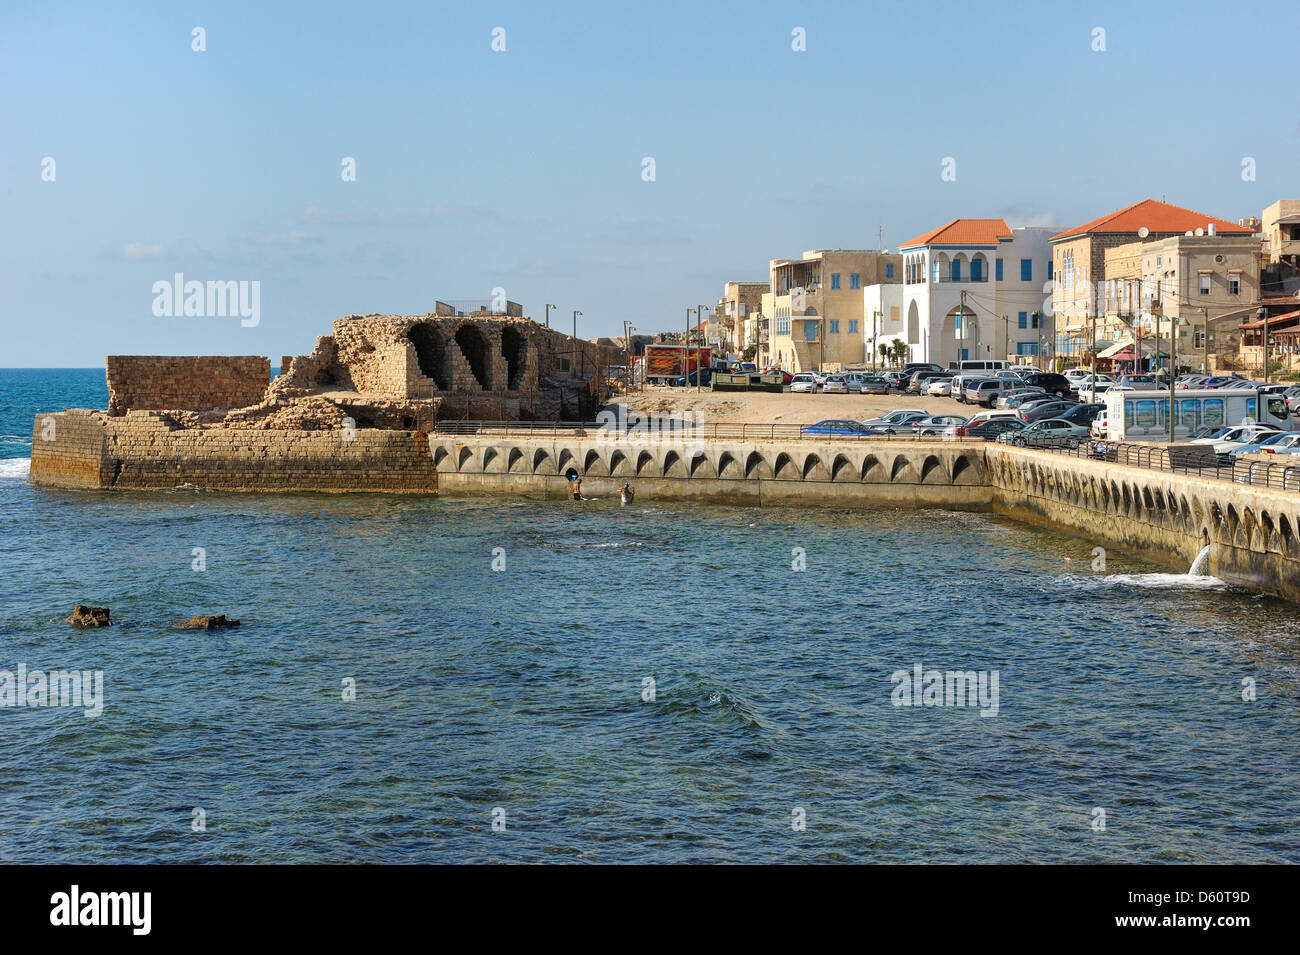 Remains of fortress walls of the Acre Stock Photo